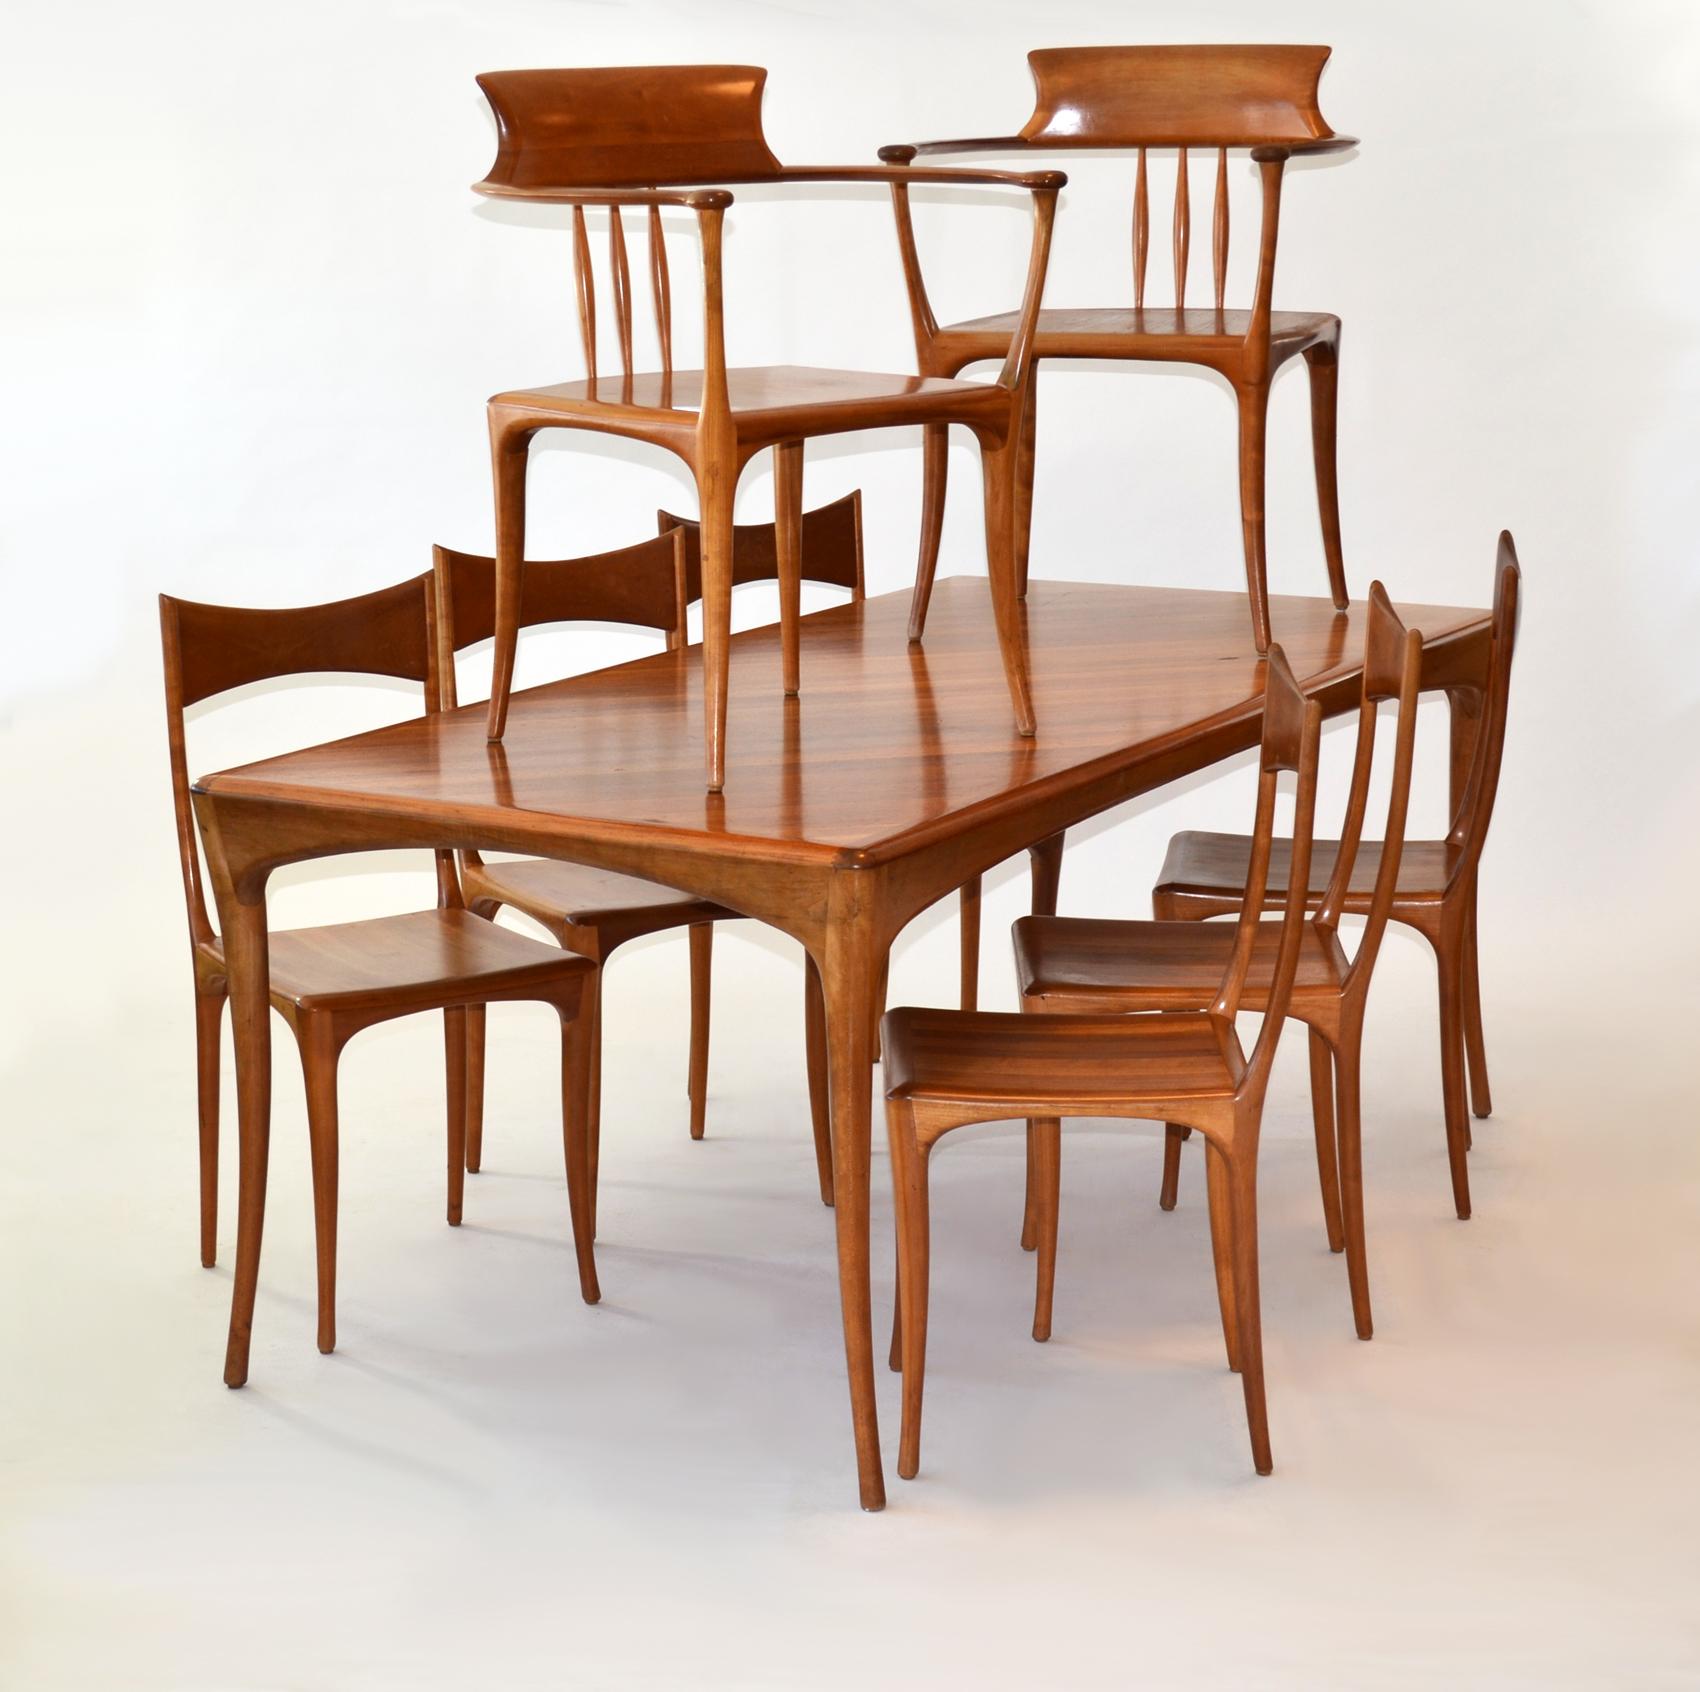 Roberto Lazzeroni for Ceccotti Collezioni DIning Set Eight Chairs 1980s Wood 

Roberto Lazzeroni for Ceccotti Collezioni Italy DIning Set featuring Eight Chairs / Table Solid Wood 1980s

Set consists of a Perro table, two Cigarra armchairs and